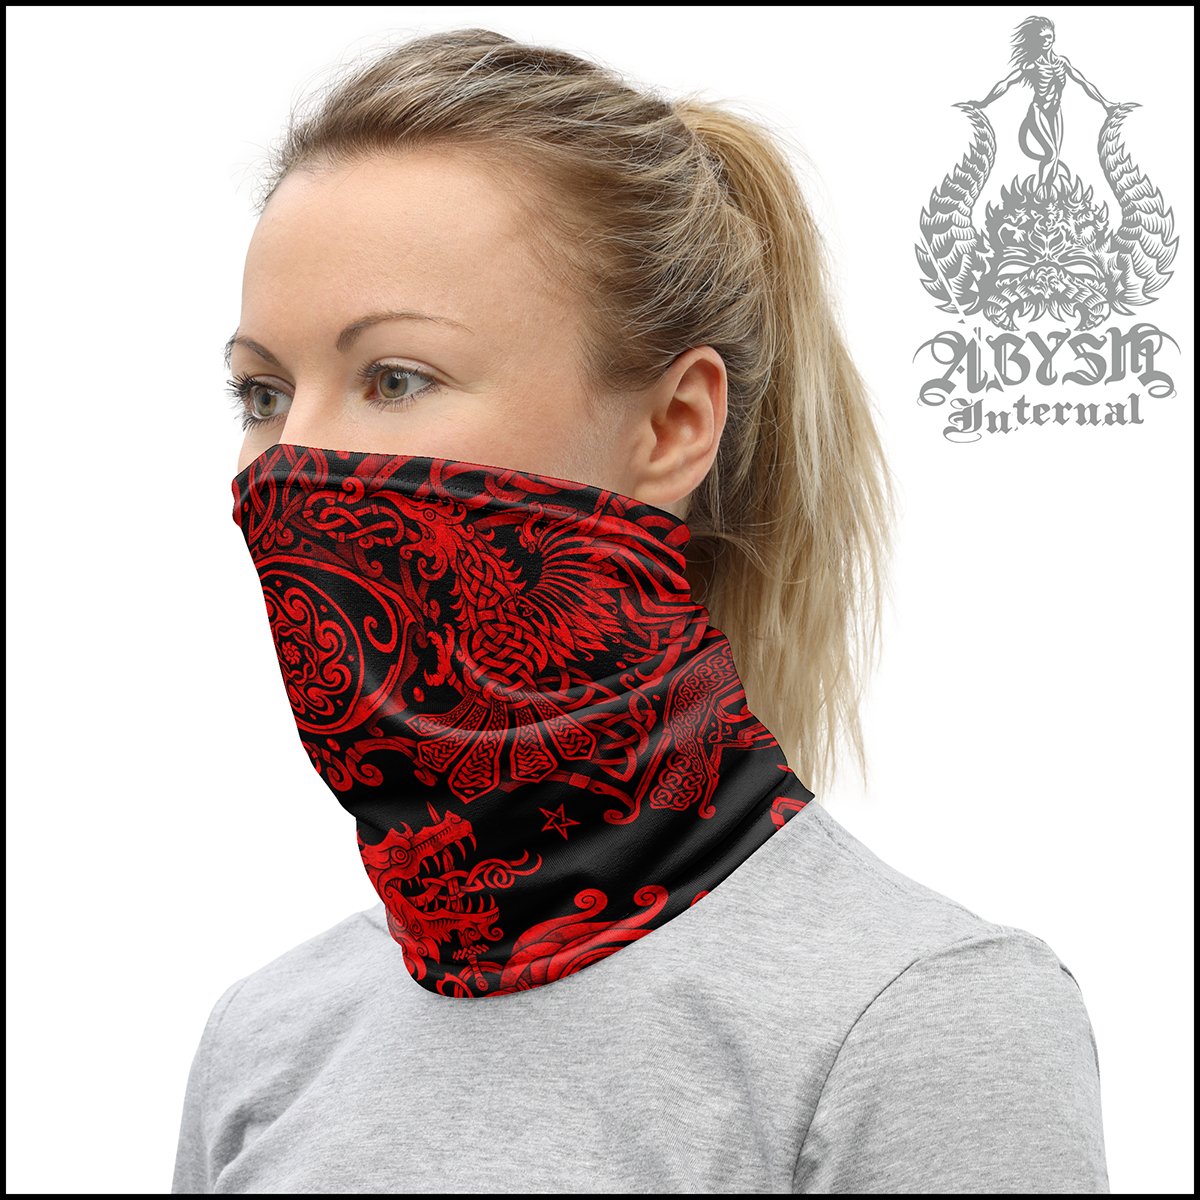 Nordic Wolf Neck Gaiter, Fenrir Face Mask, Viking Printed Head Covering, Norse Art - Bloody Red, Black - Abysm Internal